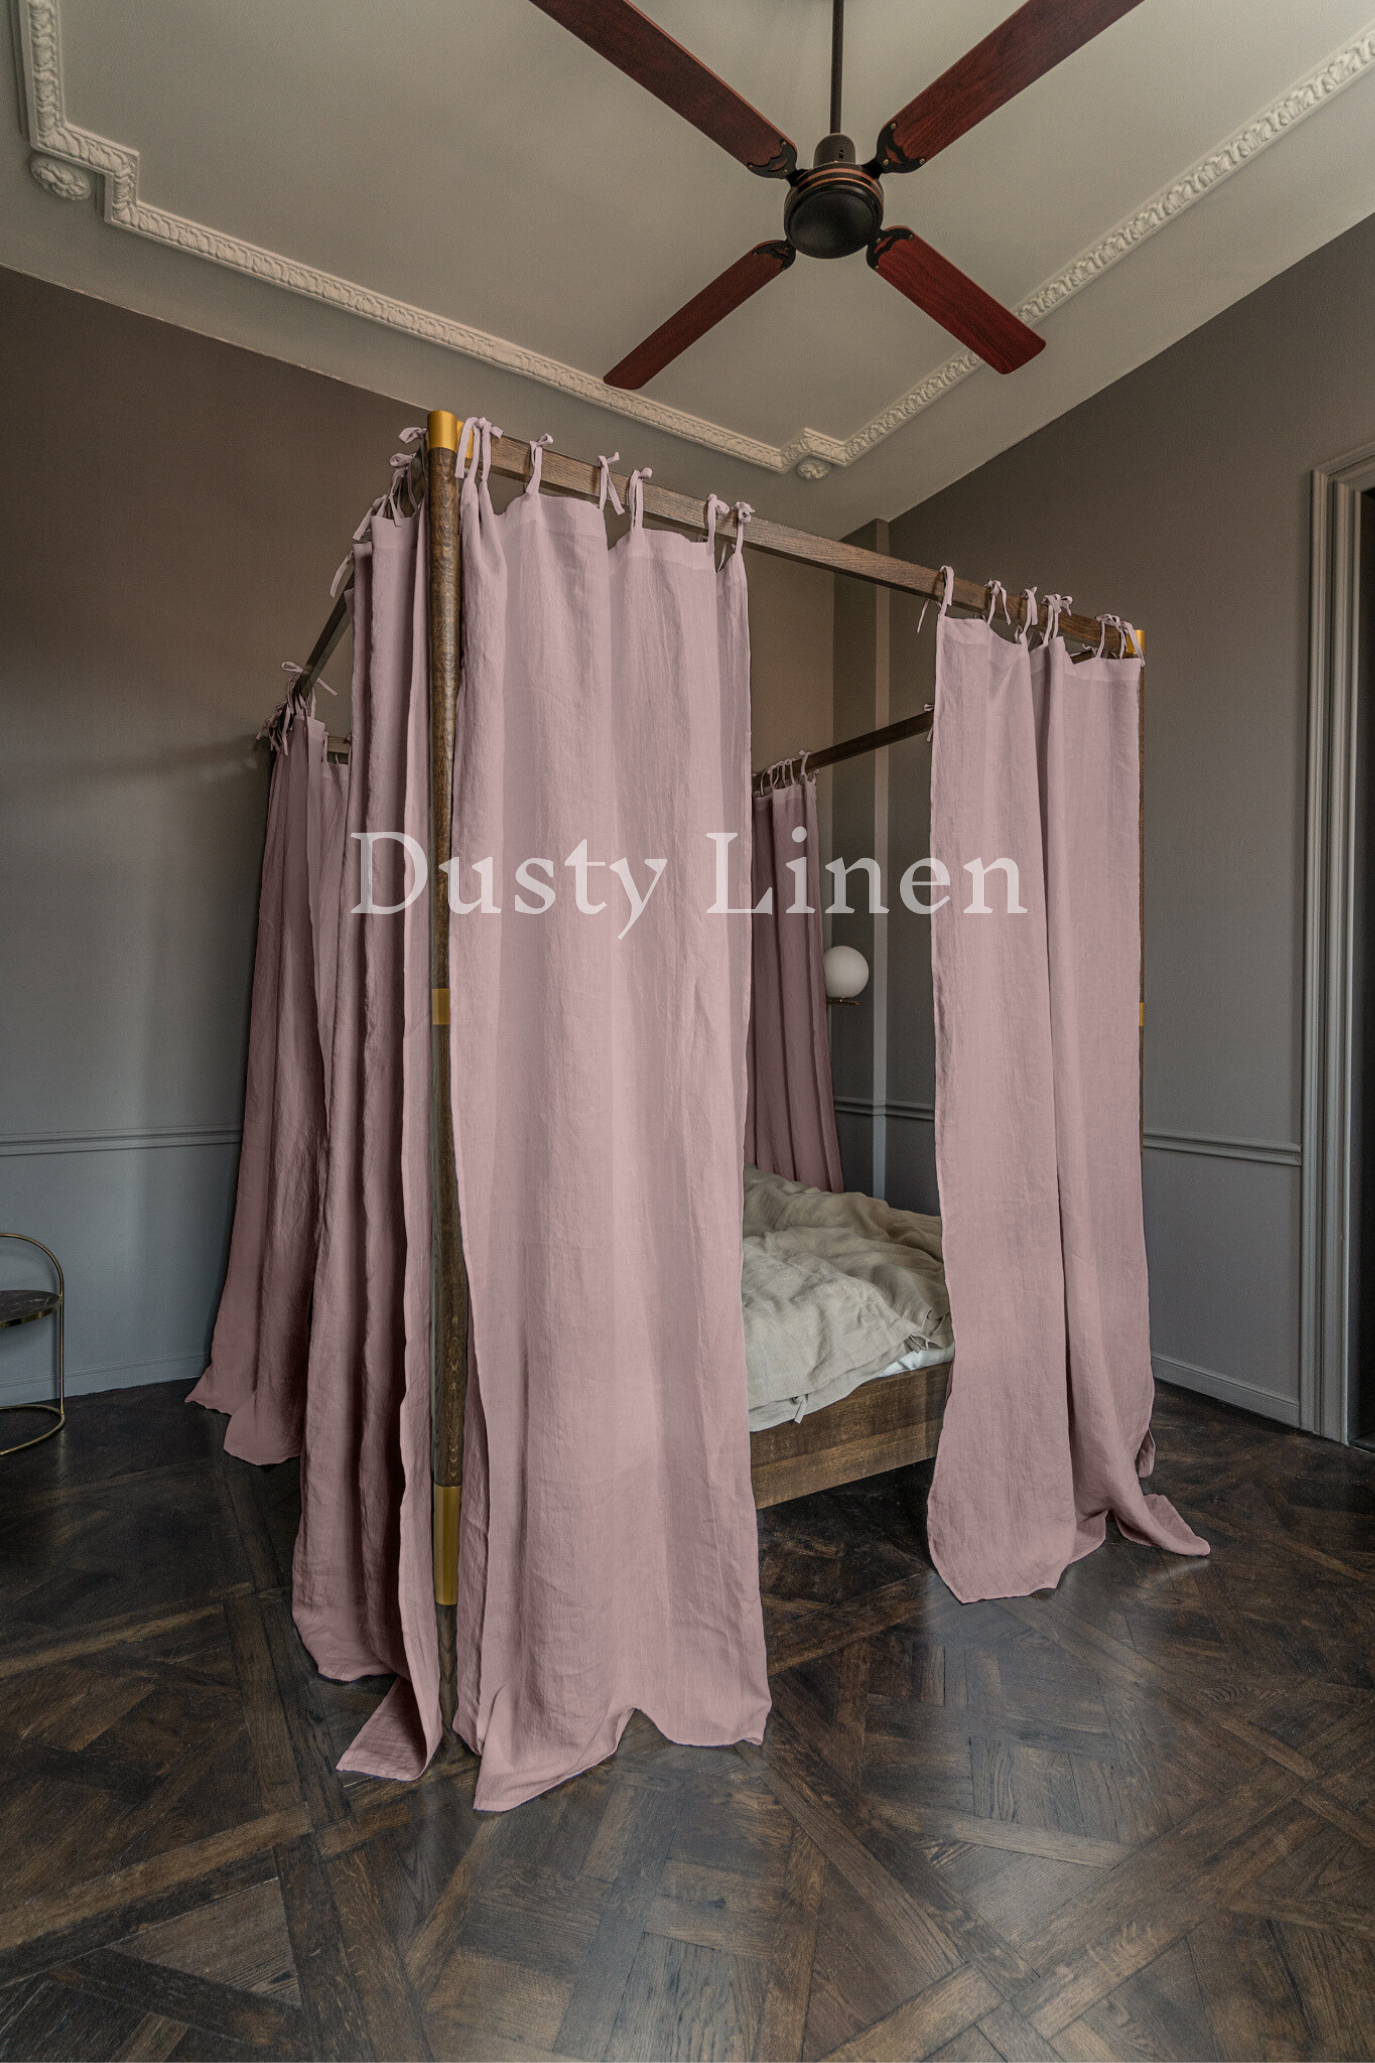 Canopy bed linen curtains with ties in Dusty Rose color-Dusty Linen-#original_alt_text#-